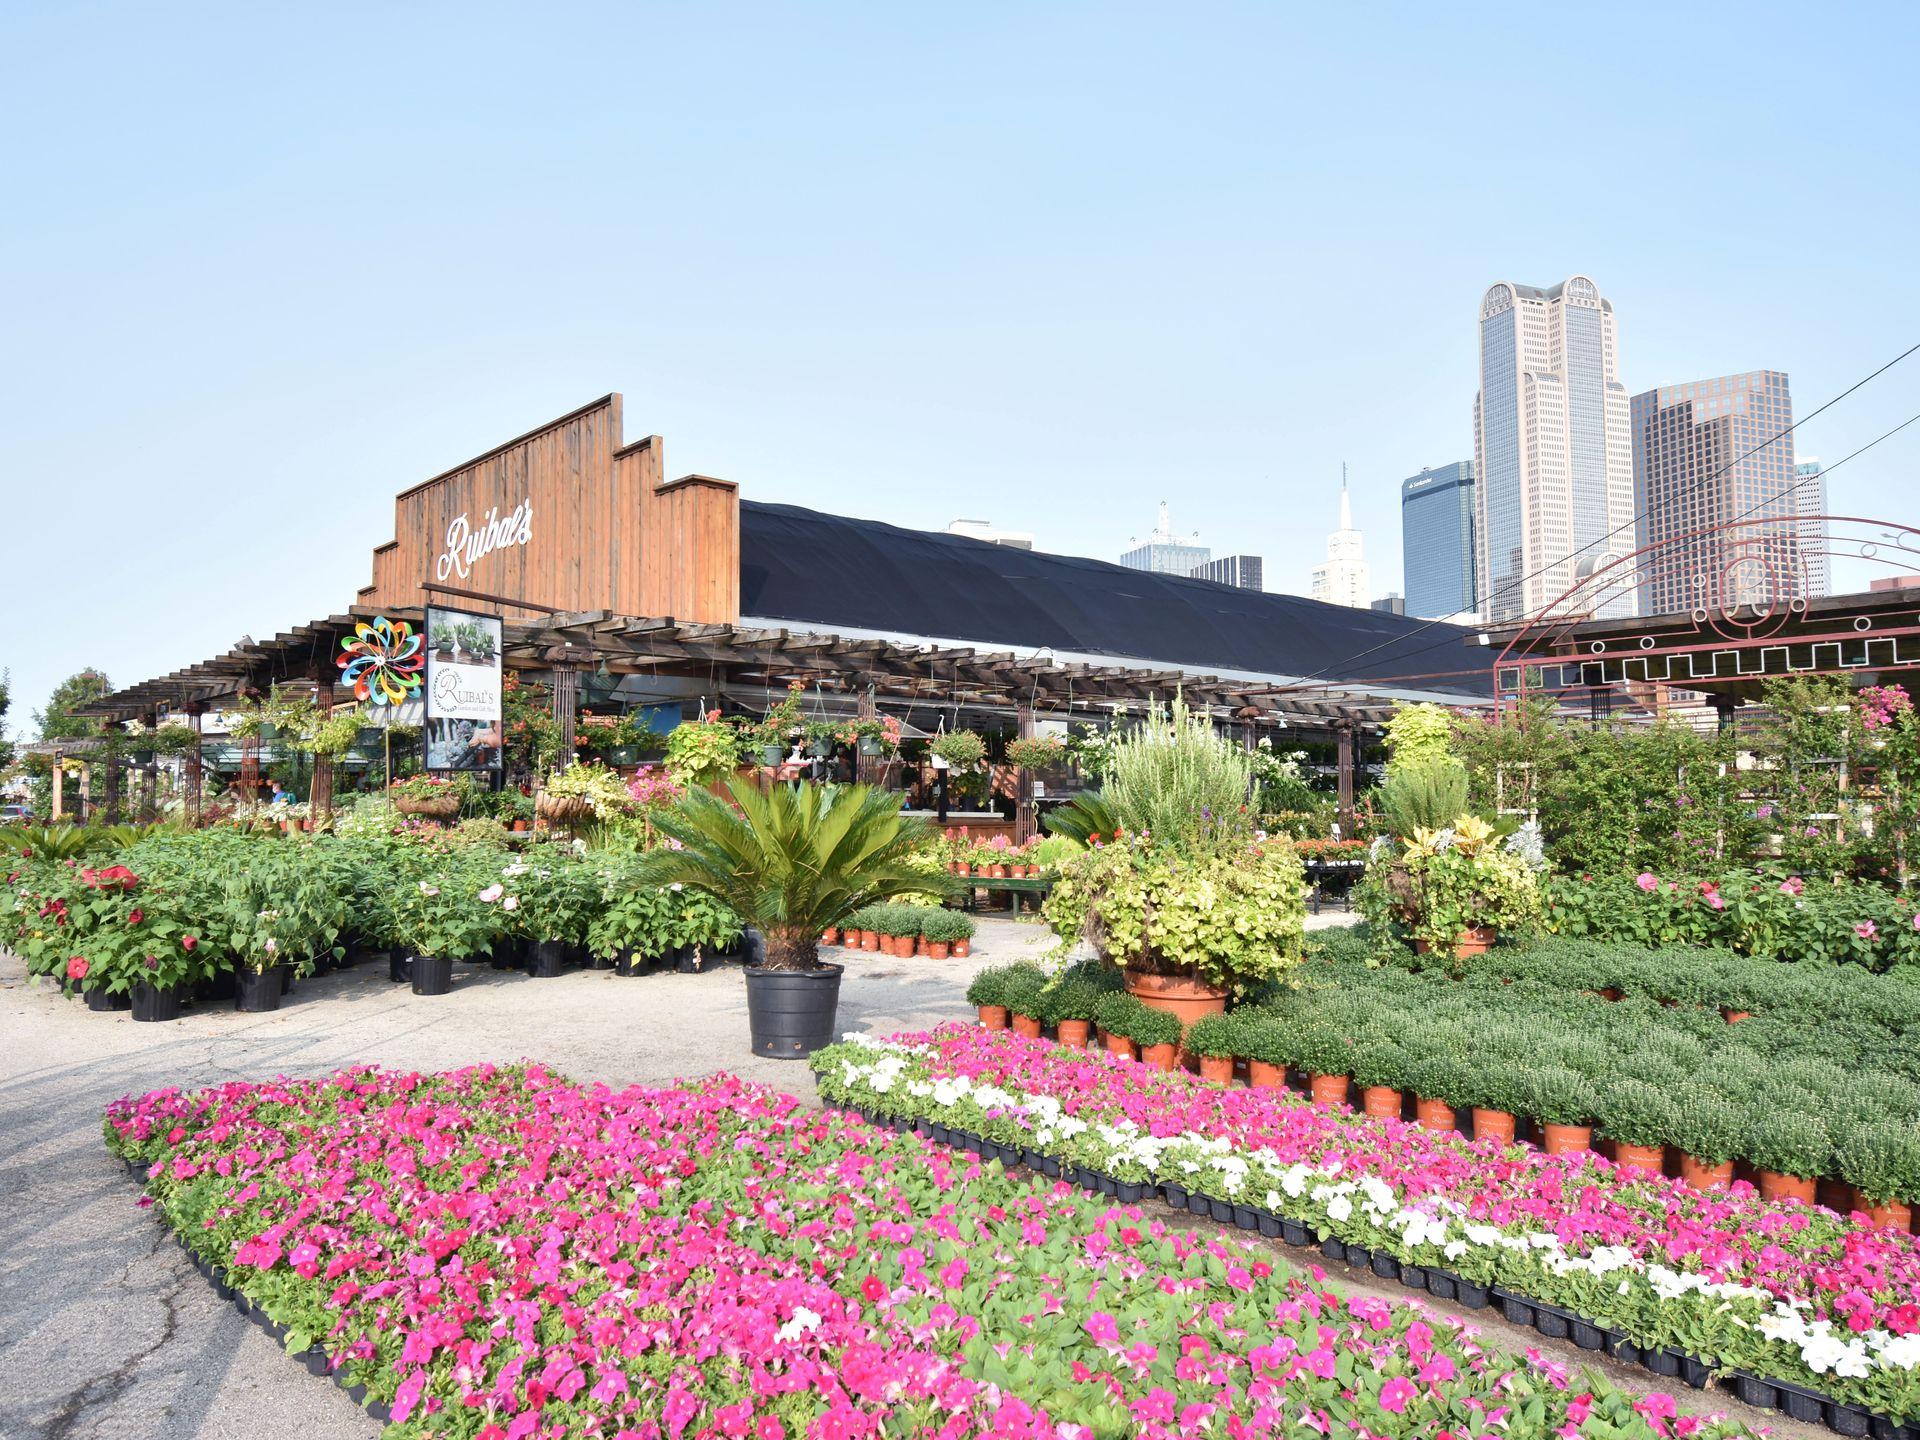 The Ruibals Plant Store with a large display of pink flowers and greenery outside of the store.